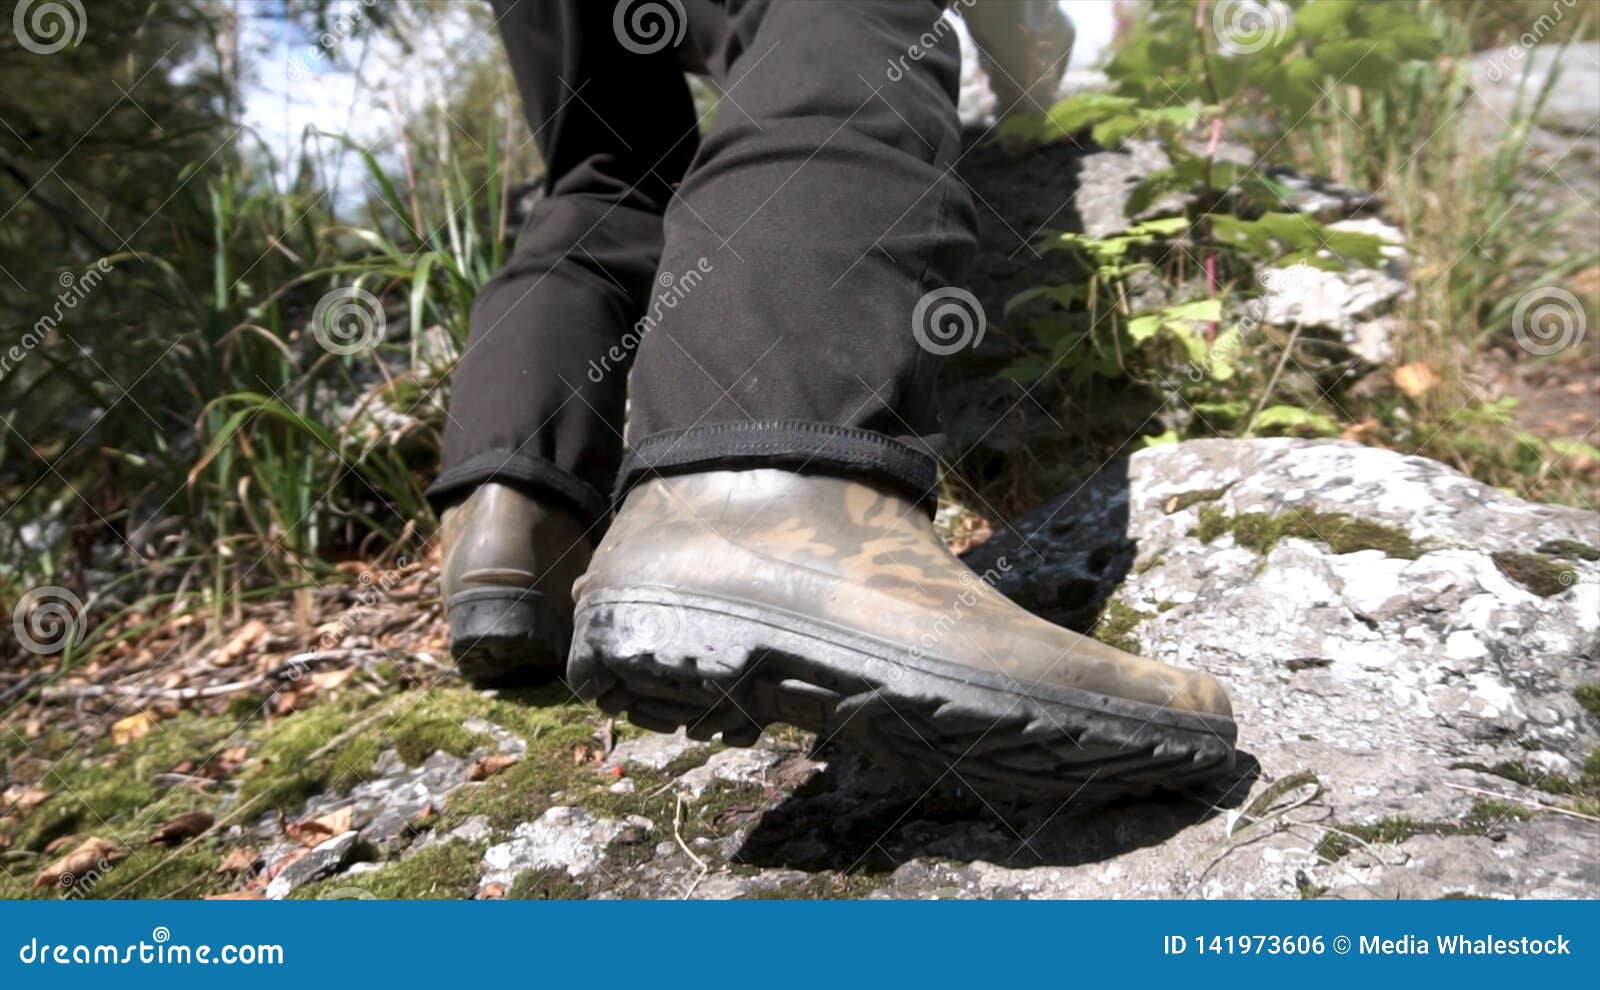 rubber hiking boots